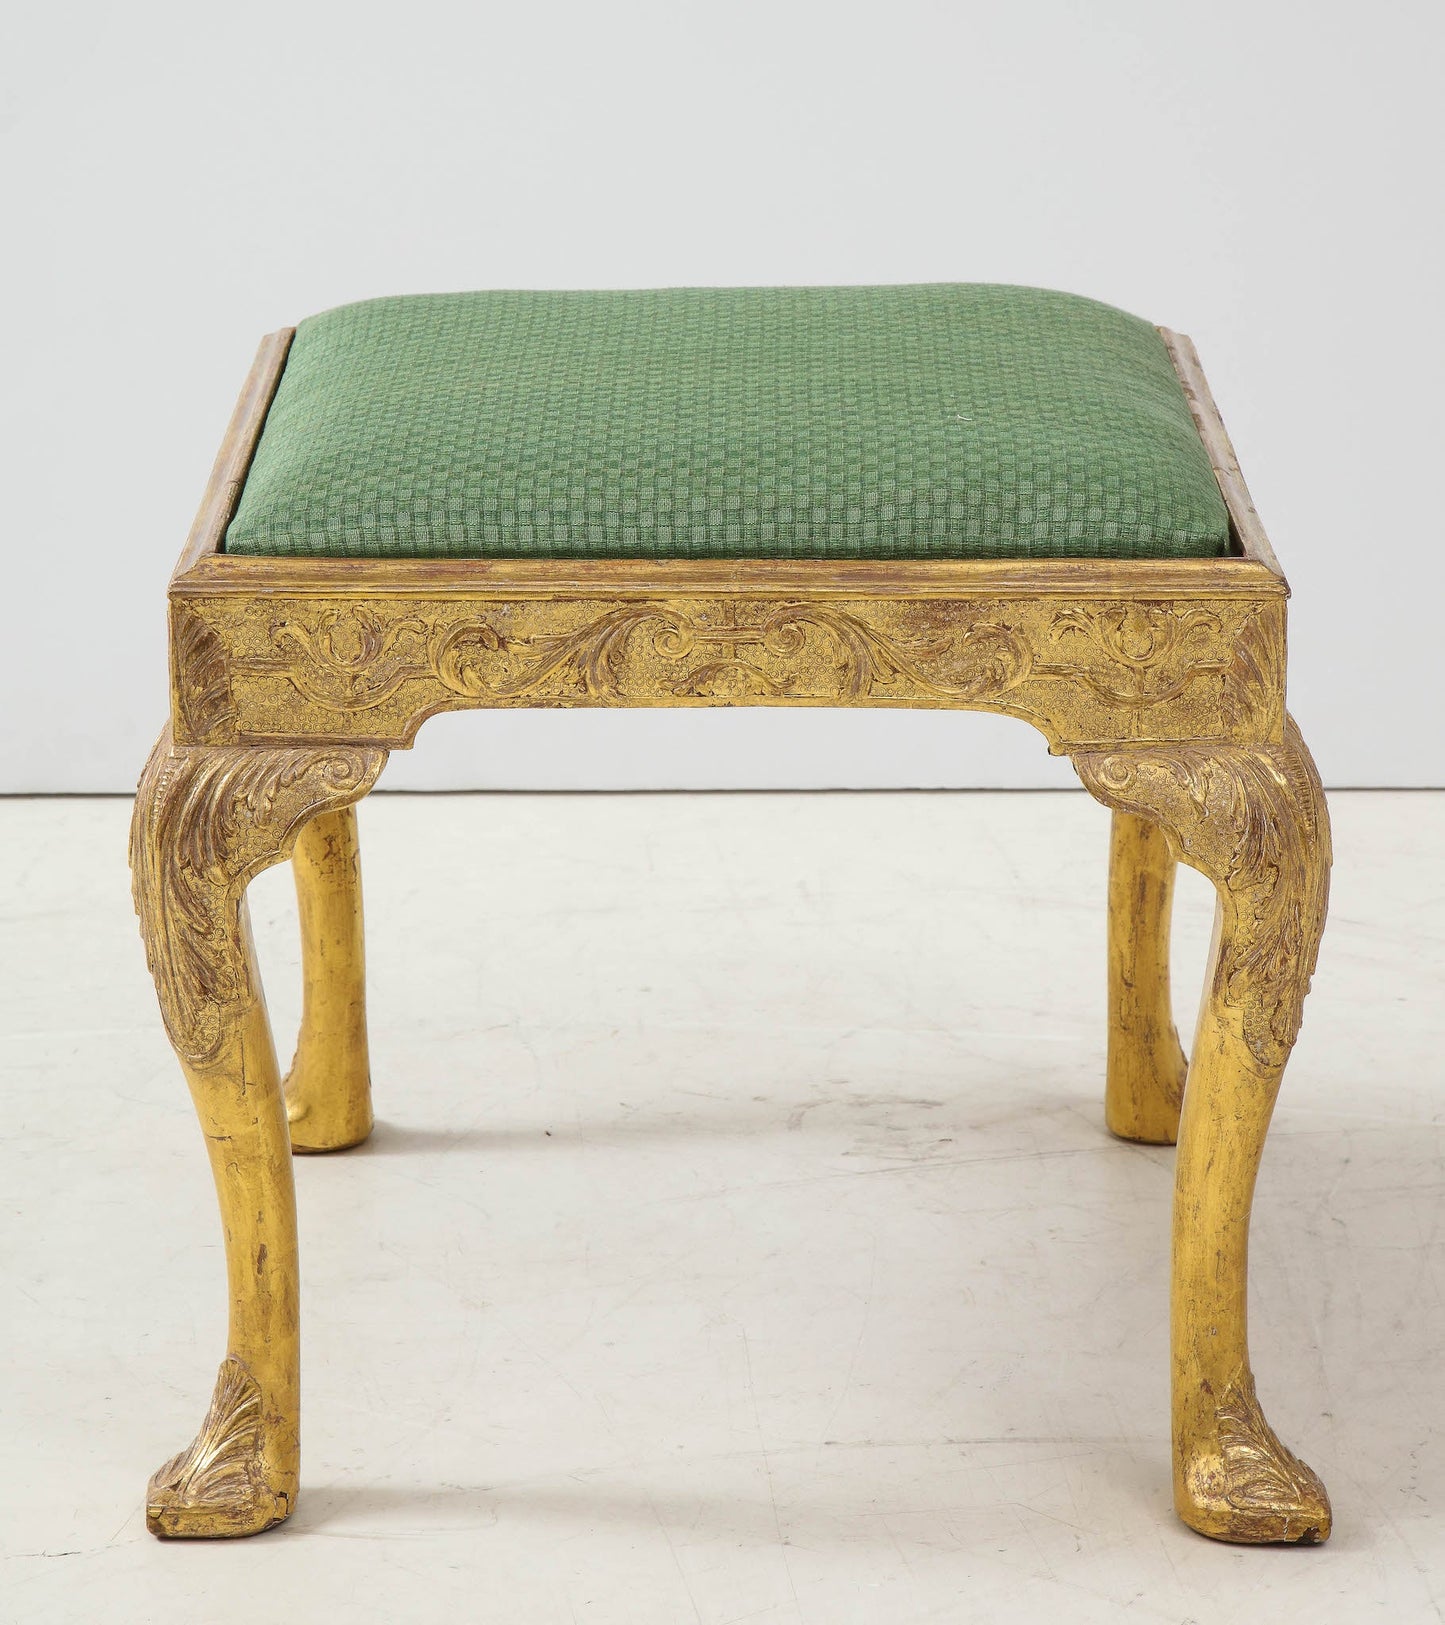 Carved-Gesso-Stool-with-Drop-In-Seat-(C-1740)-8